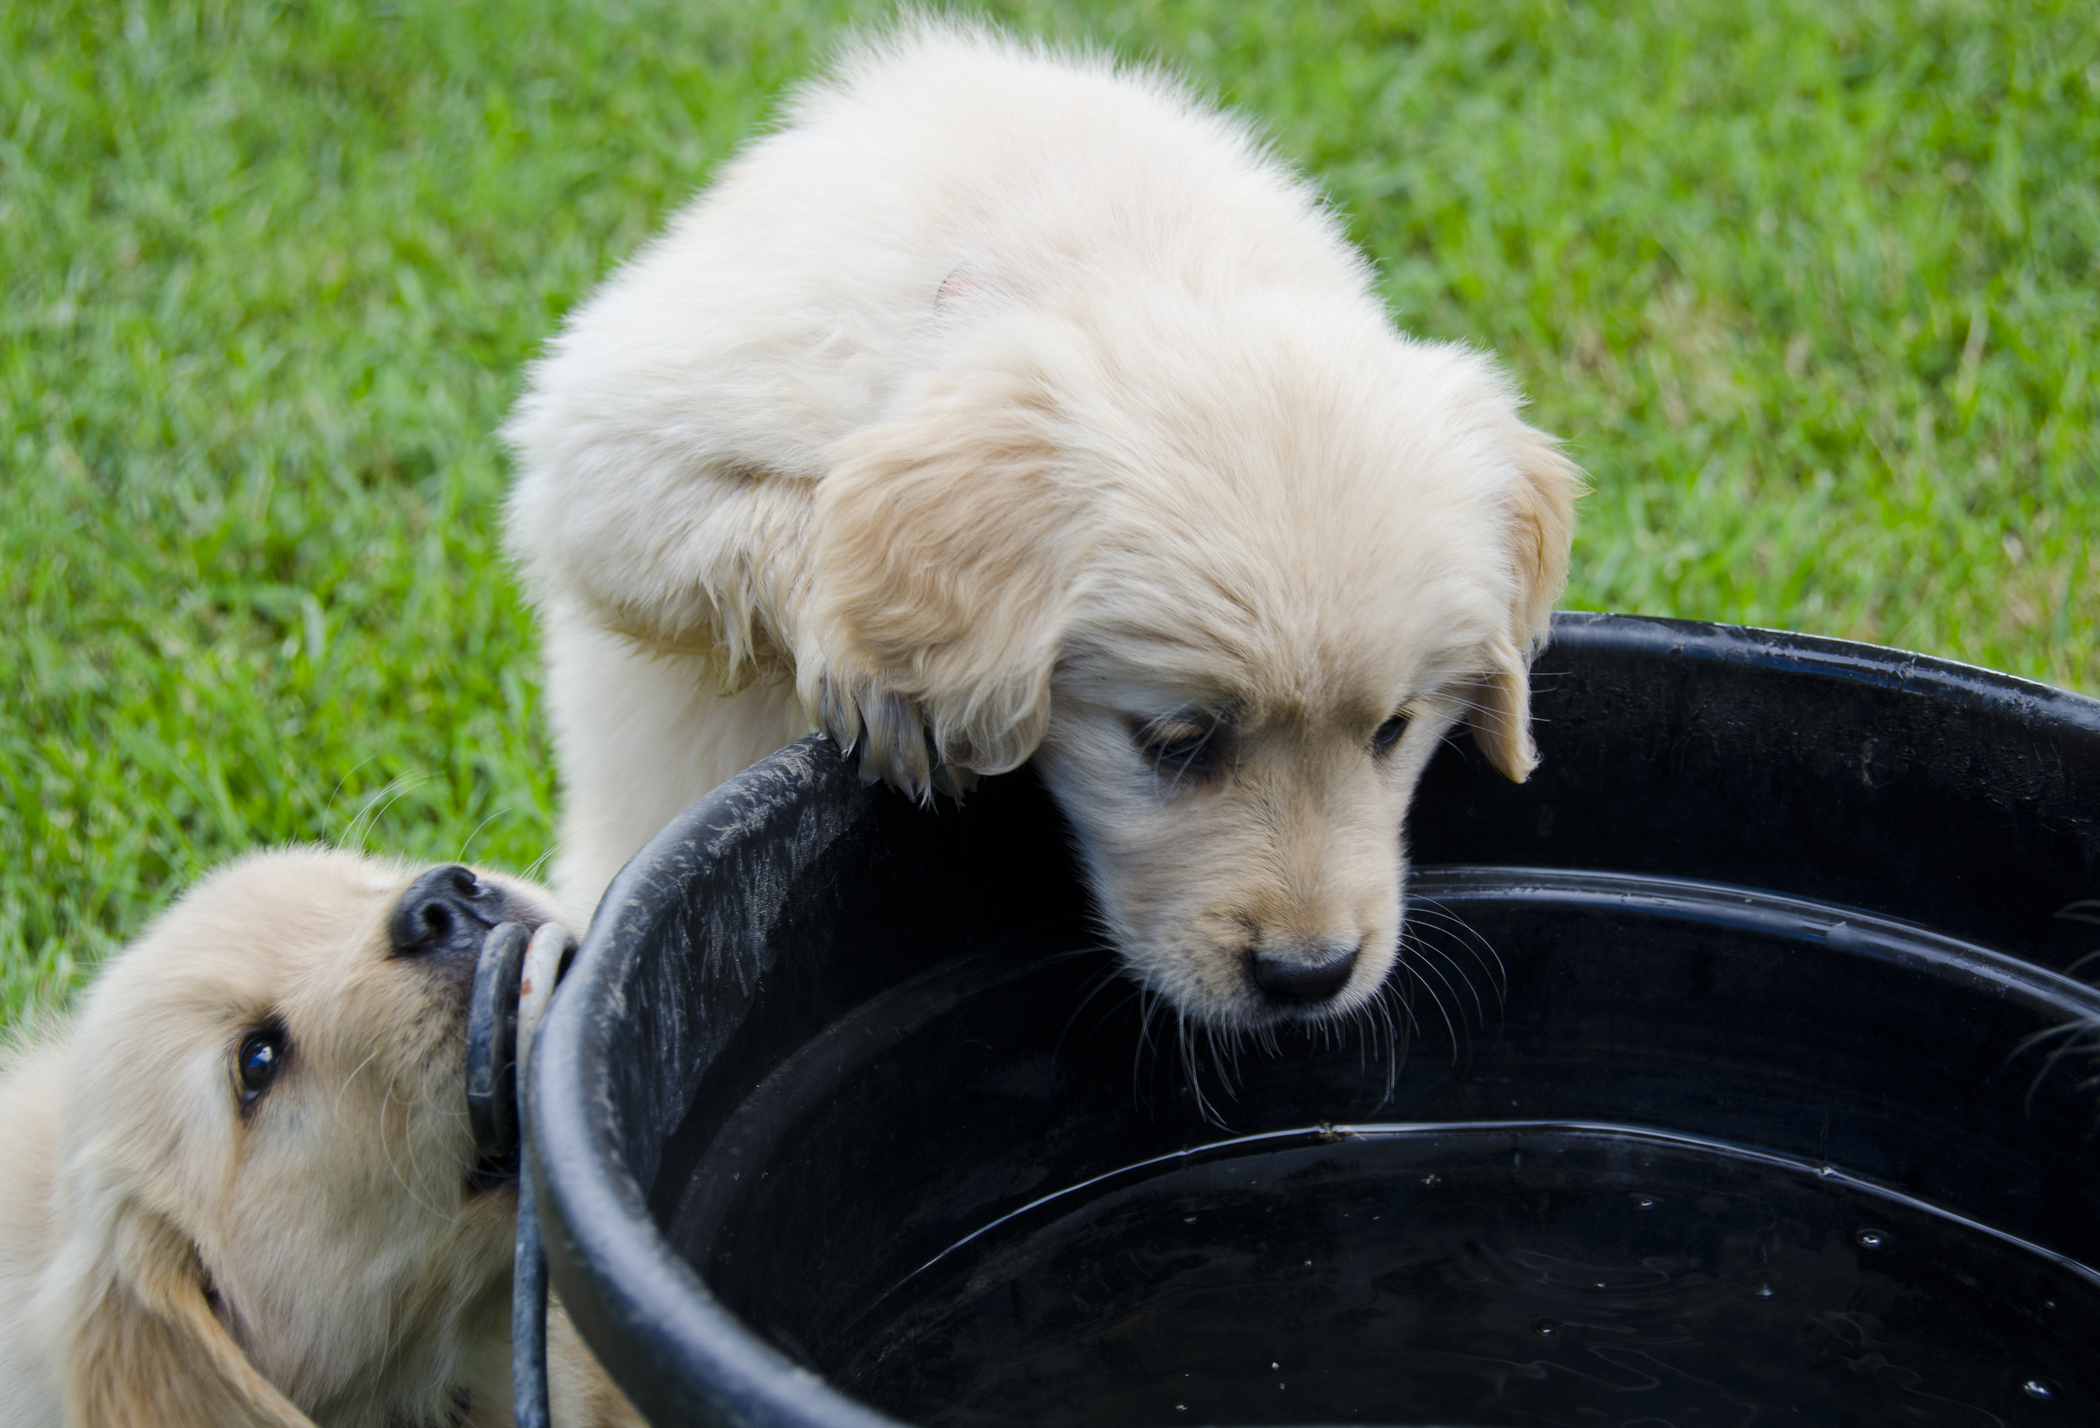 Golden Retriever puppy looking into a water bucket, which can pose a drowning risk for puppies